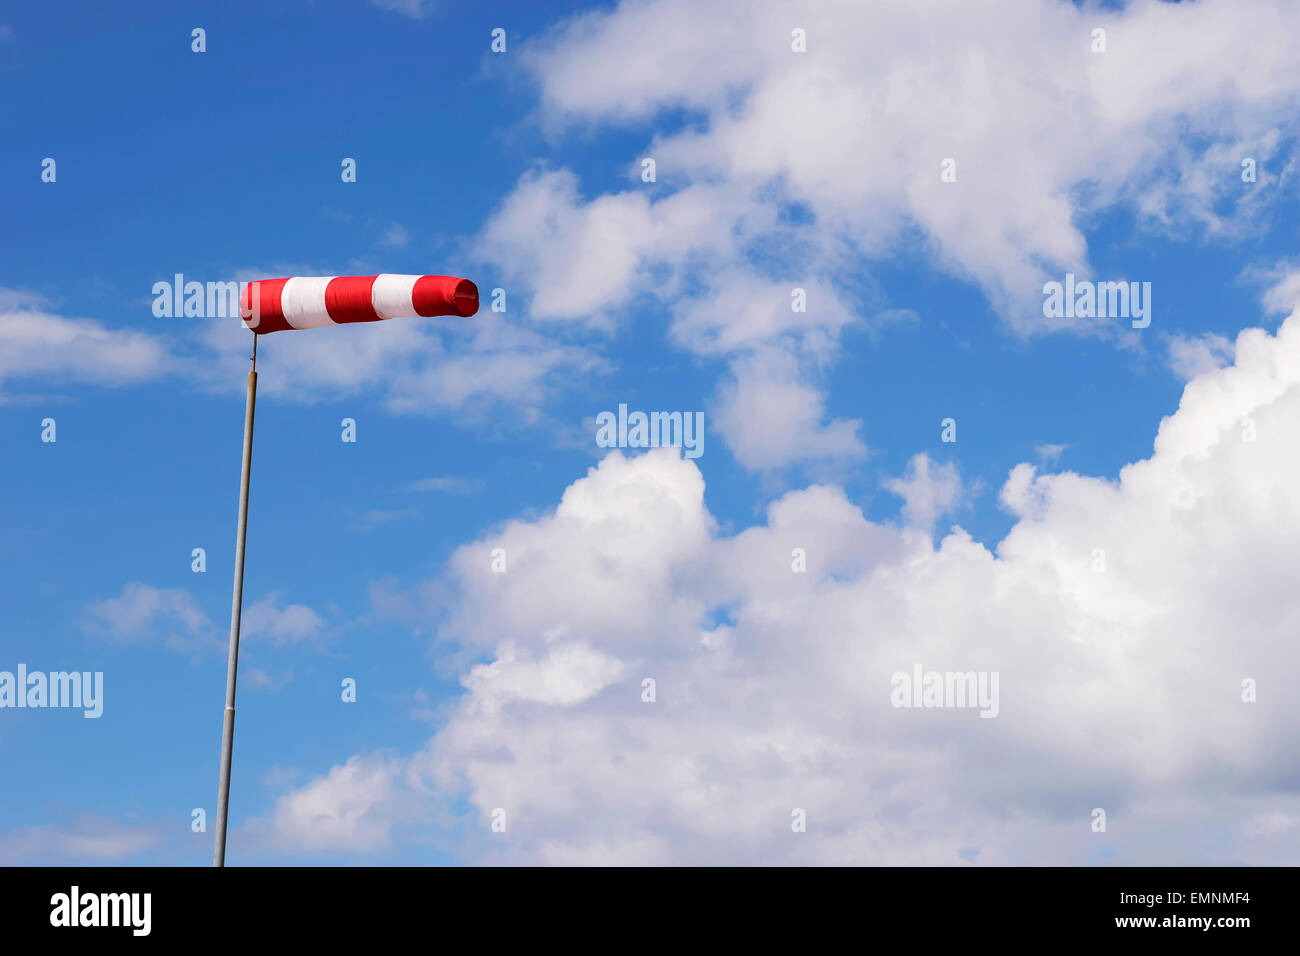 Image of a red white wind vane against blue sky with white clouds Stock Photo